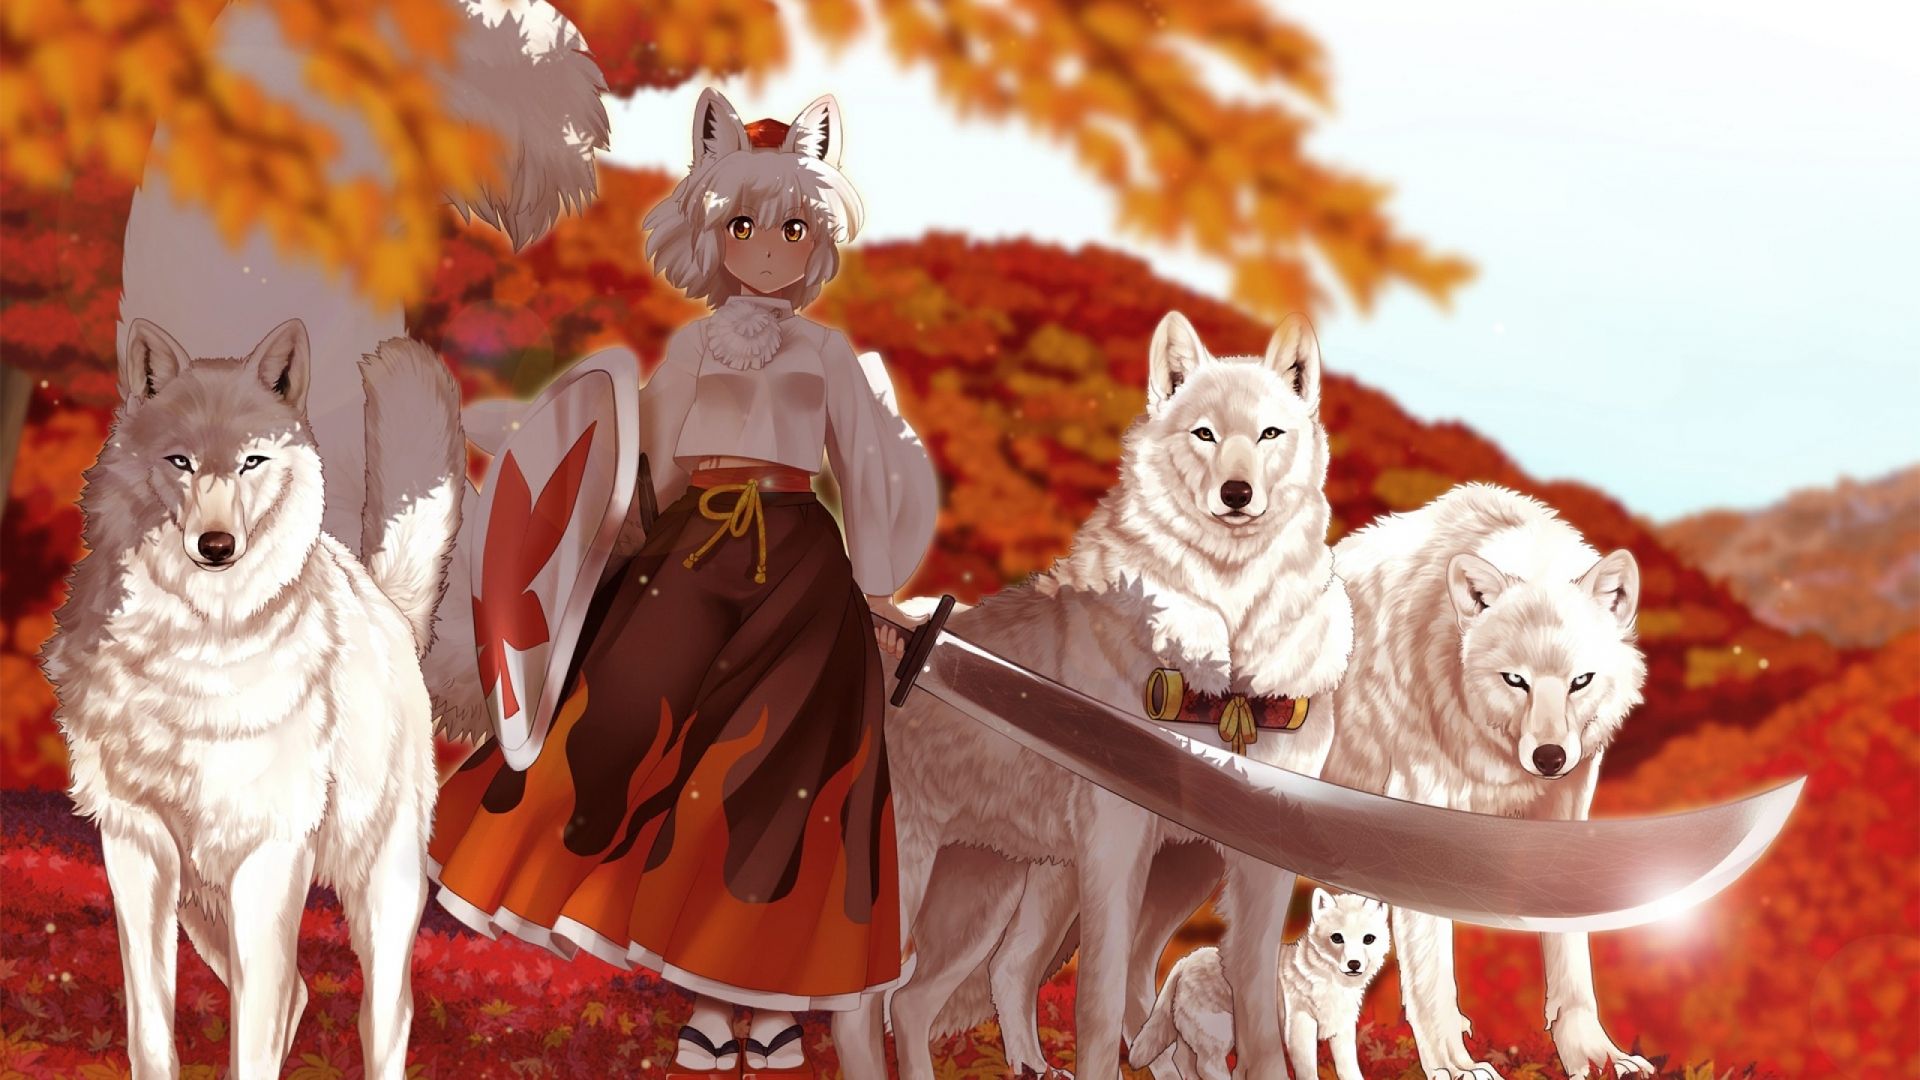 Free download Anime Wolf Girl wallpaper 1331760 [2560x1440] for your Desktop, Mobile & Tablet. Explore Anime Wolf Girl Wallpaper. Wolfs Rain Wallpaper, Cool Anime Wolf Wallpaper, Spice and Wolf Wallpaper